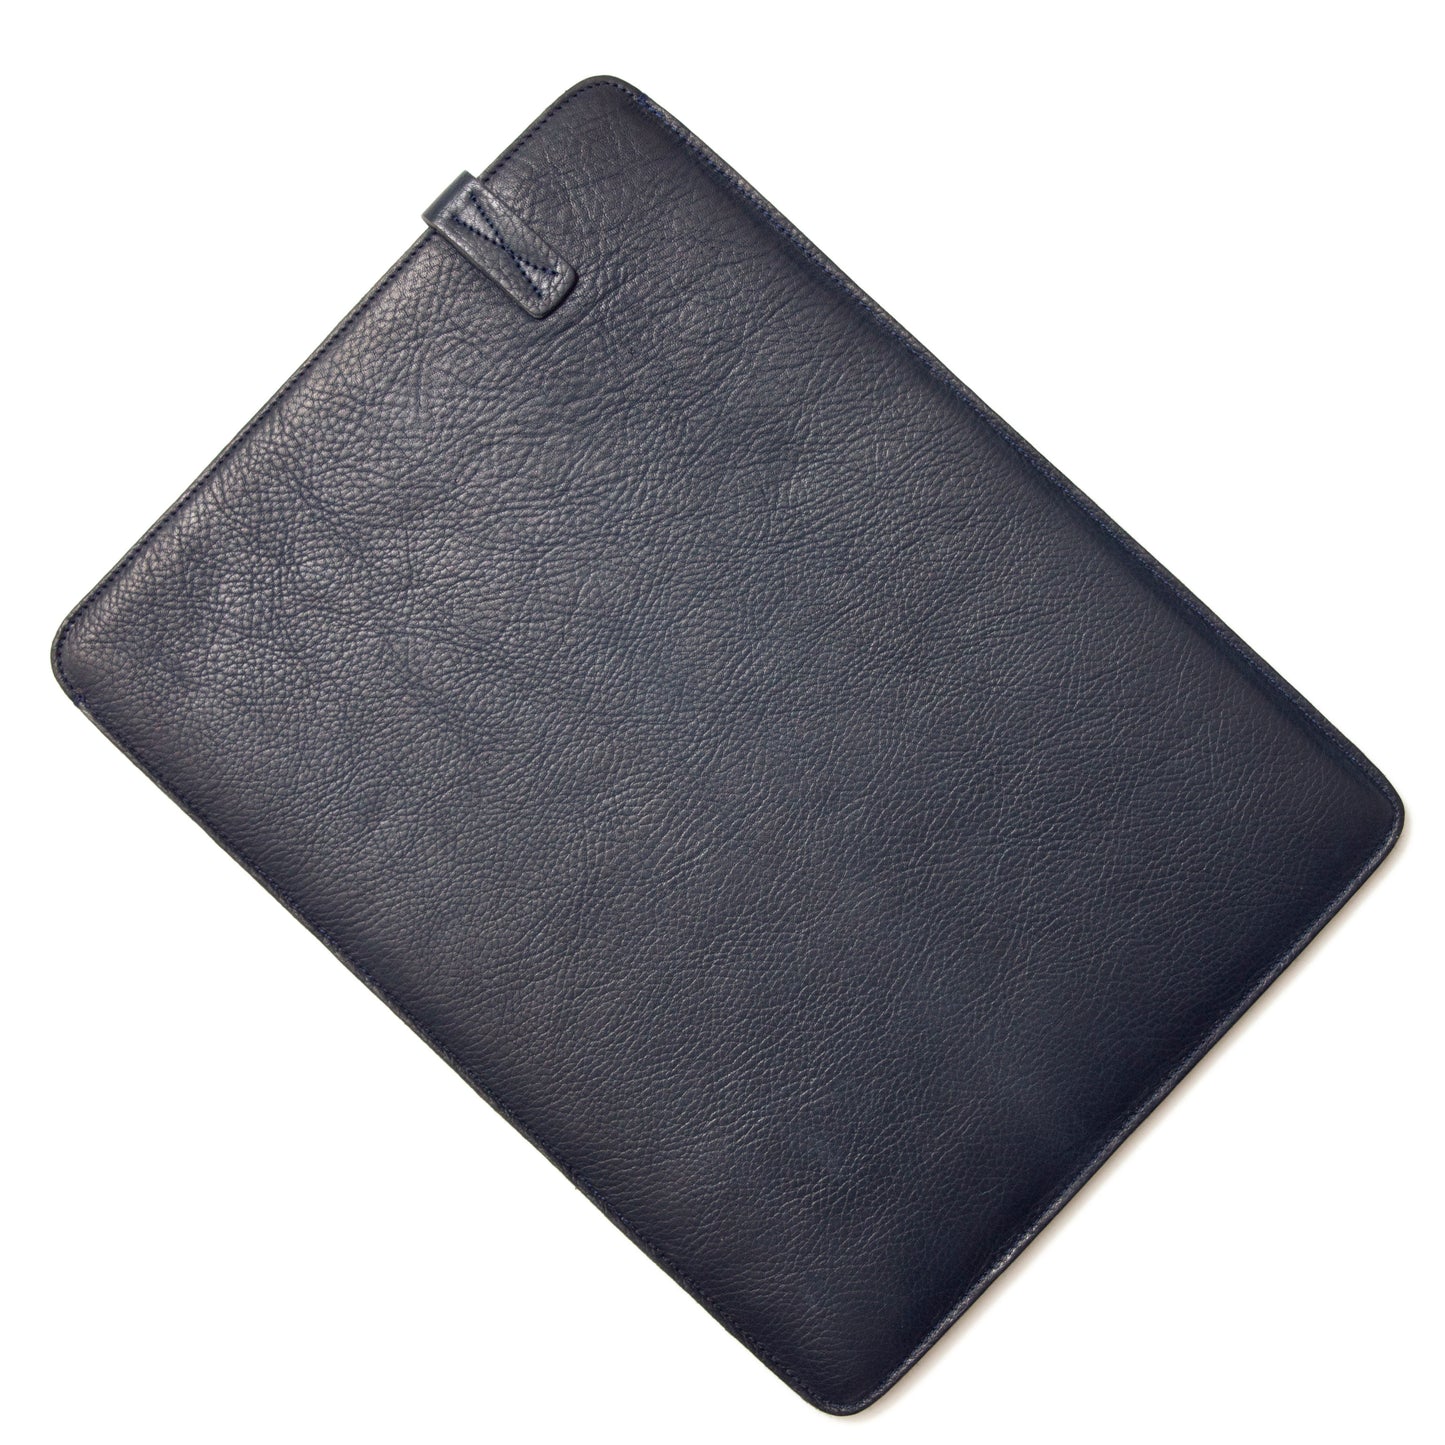 Luxurious Full-Grain Genuine vegetable-tanned Leather/Felt for MacBook Air 13"M1/M2/M3/Macbook Pro 14"M3/M1/M2/M3 Pro/iPad Pro 12,9"M2/Notebook Sleeve, 1 magnetic Clasp.- 1007